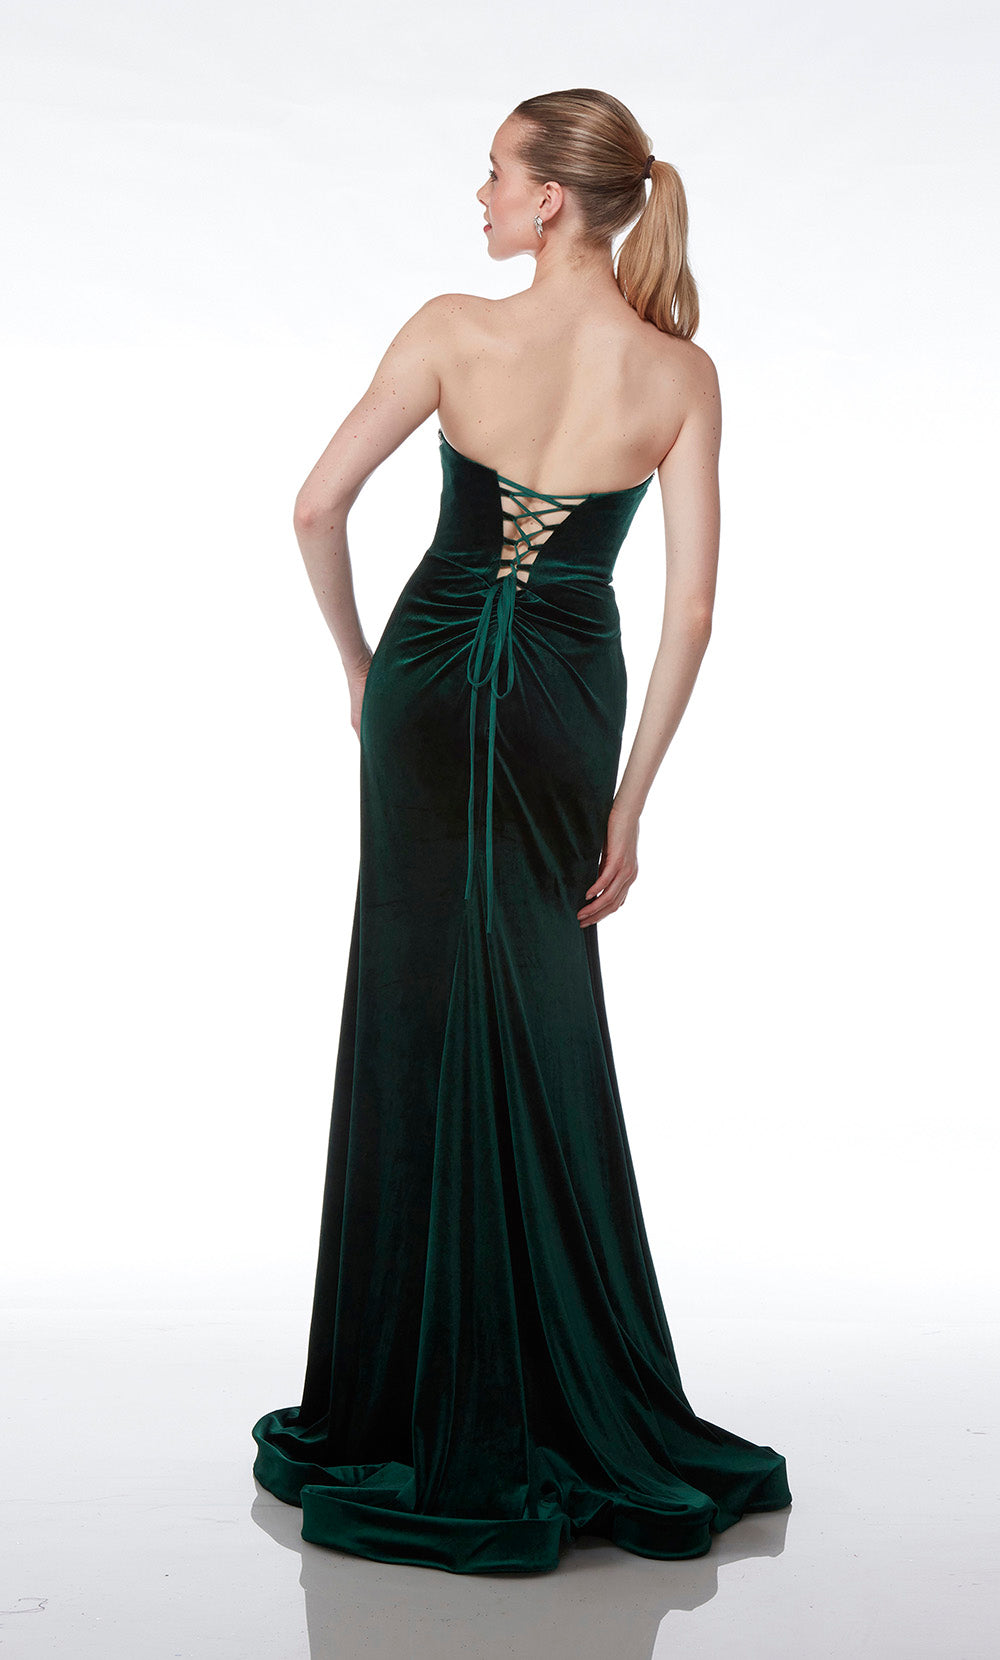 Pine velvet fit-and-flare formal gown: Silver rhinestone-trimmed strapless neckline, lace-up back, and an beautiful train for an stunning and elegant look.